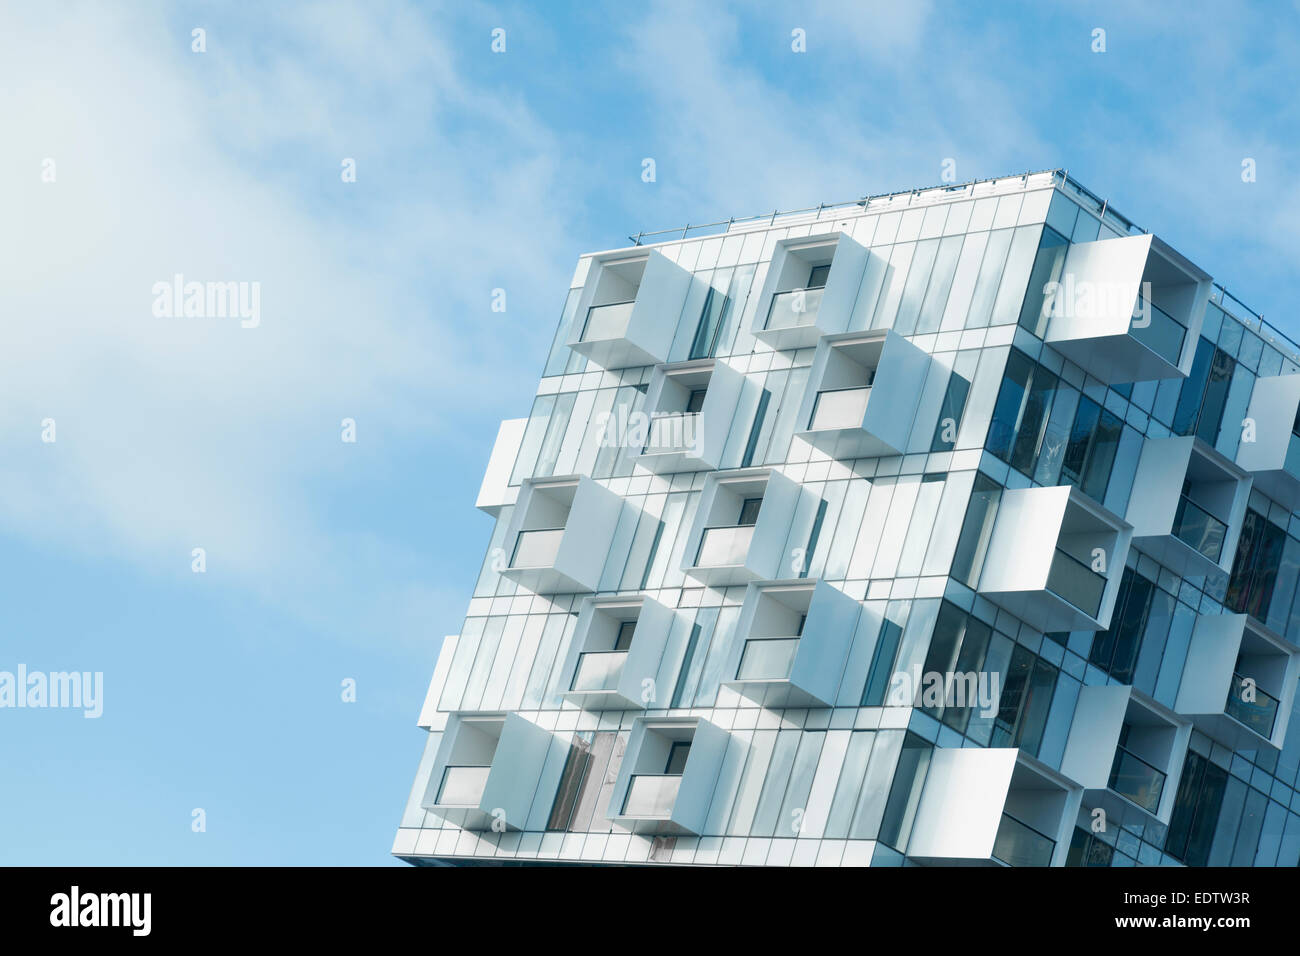 Modern apartment building with balconies Stock Photo